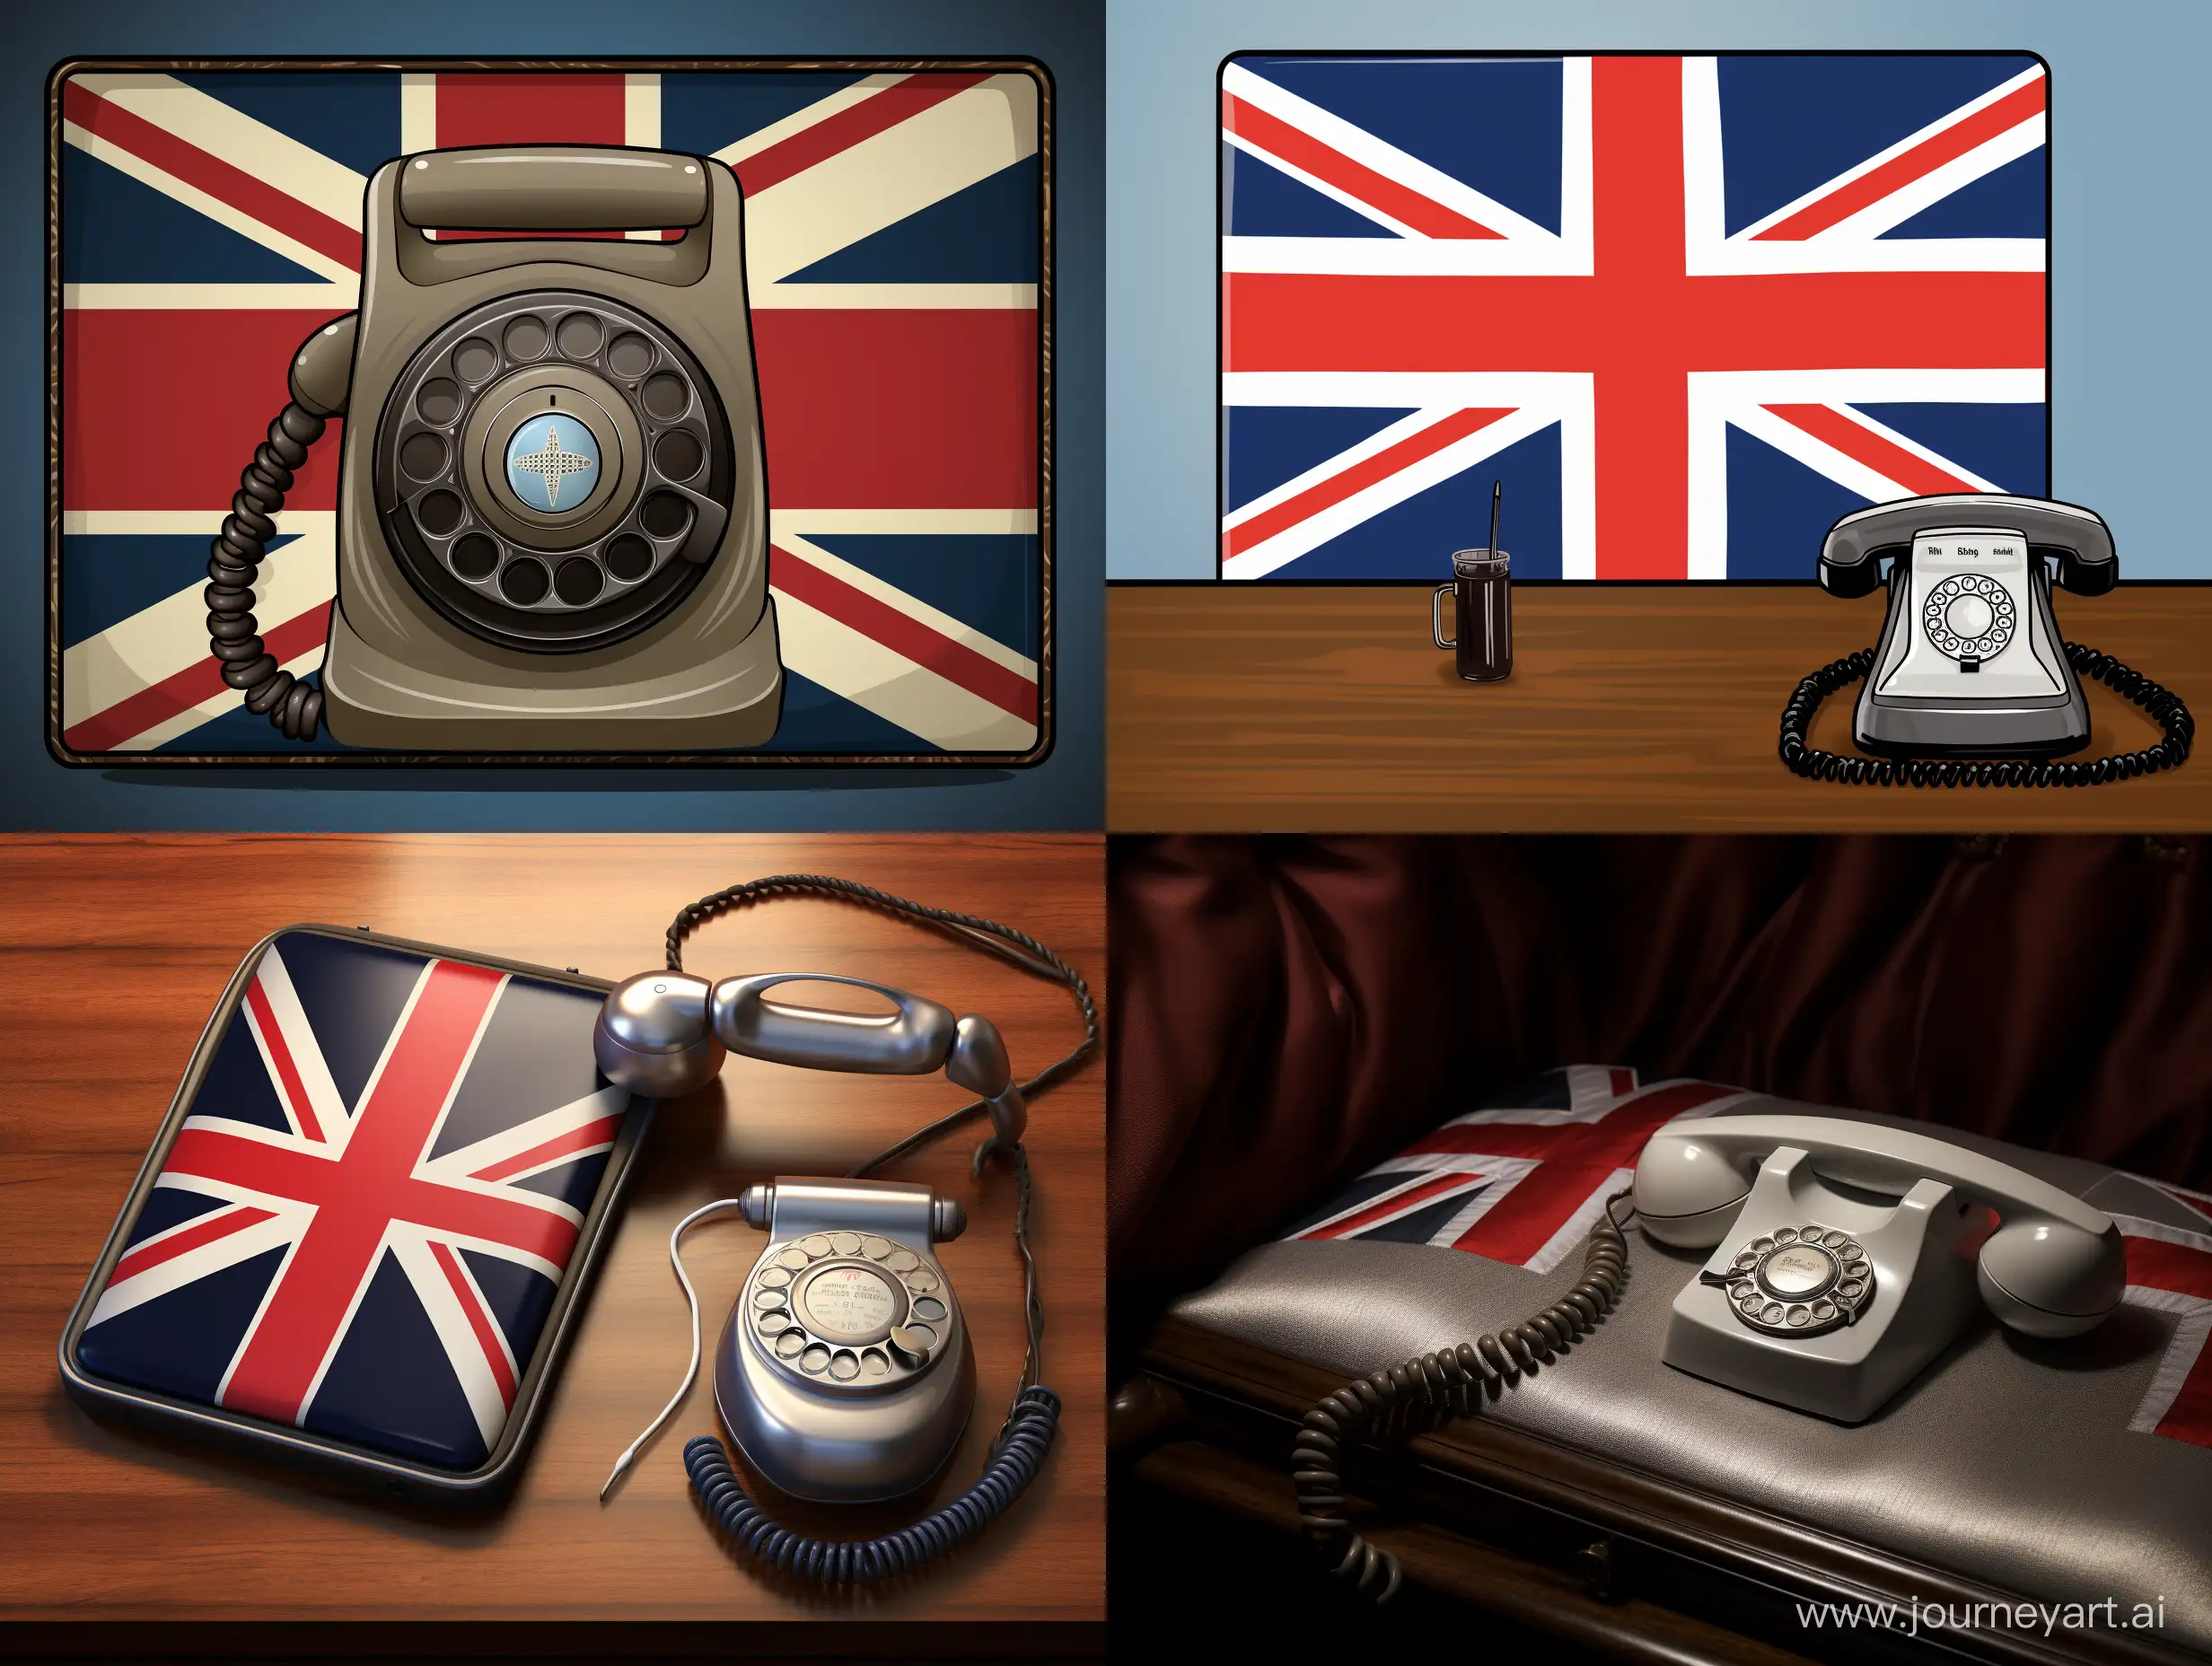 Dankirk-National-Flag-with-Button-Phone-and-Friendship